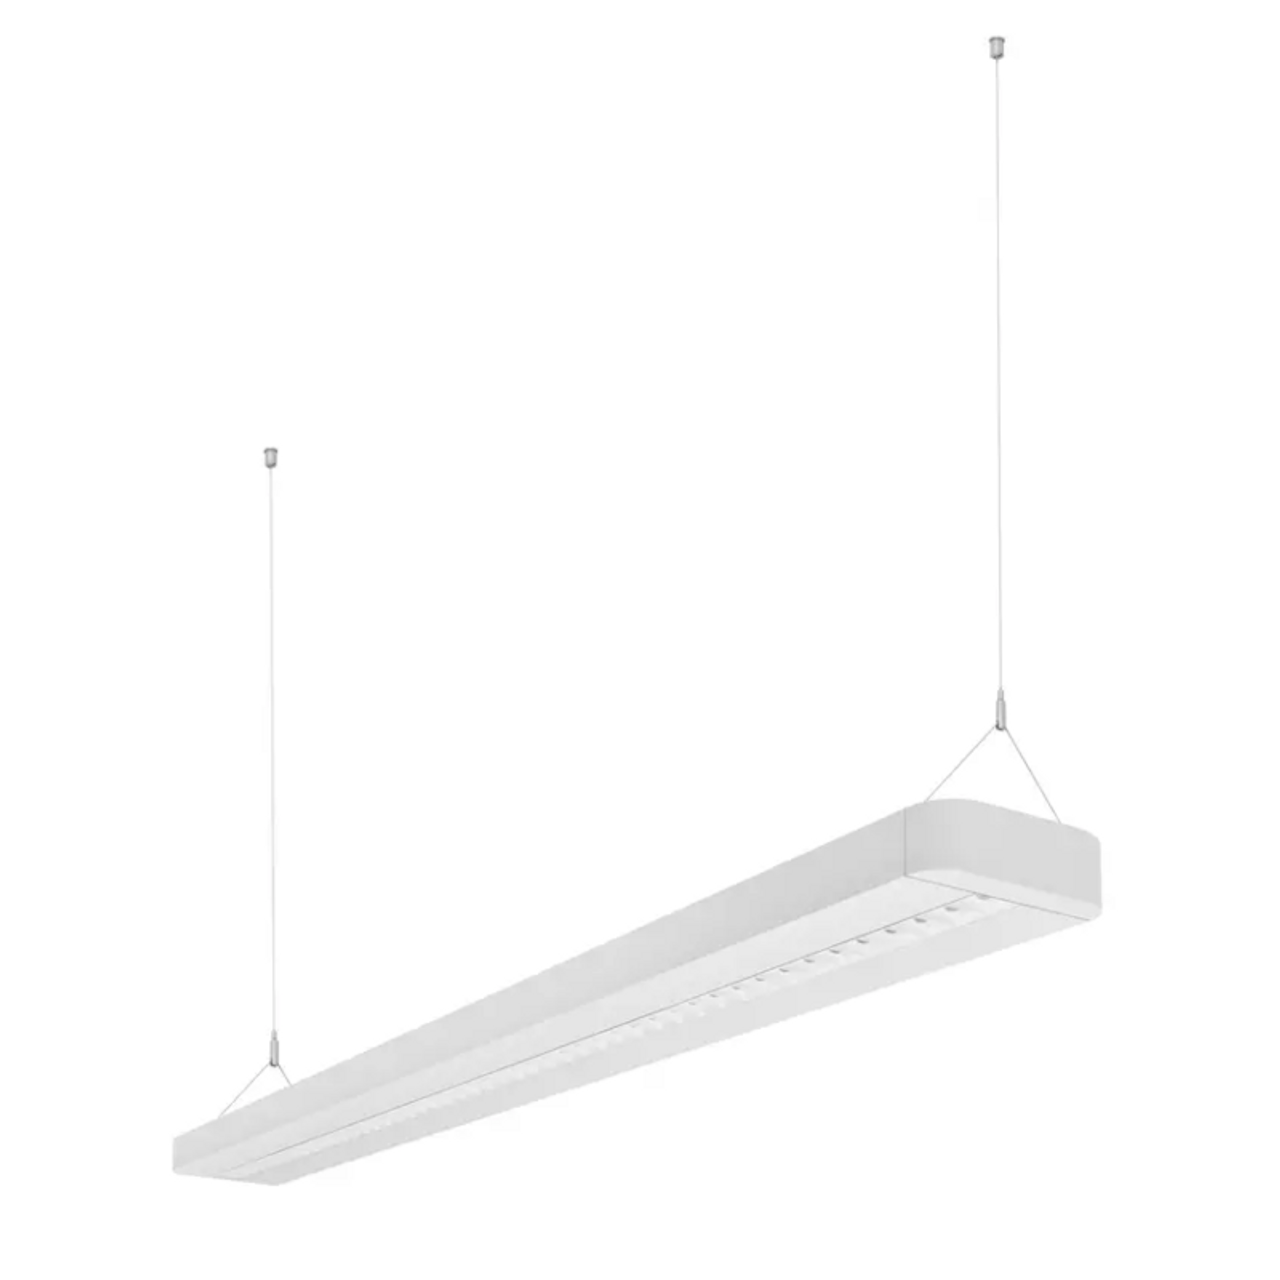 LED Linear Indiviled Direct/Indirect 1200mm 42W 5050lm 4000K White